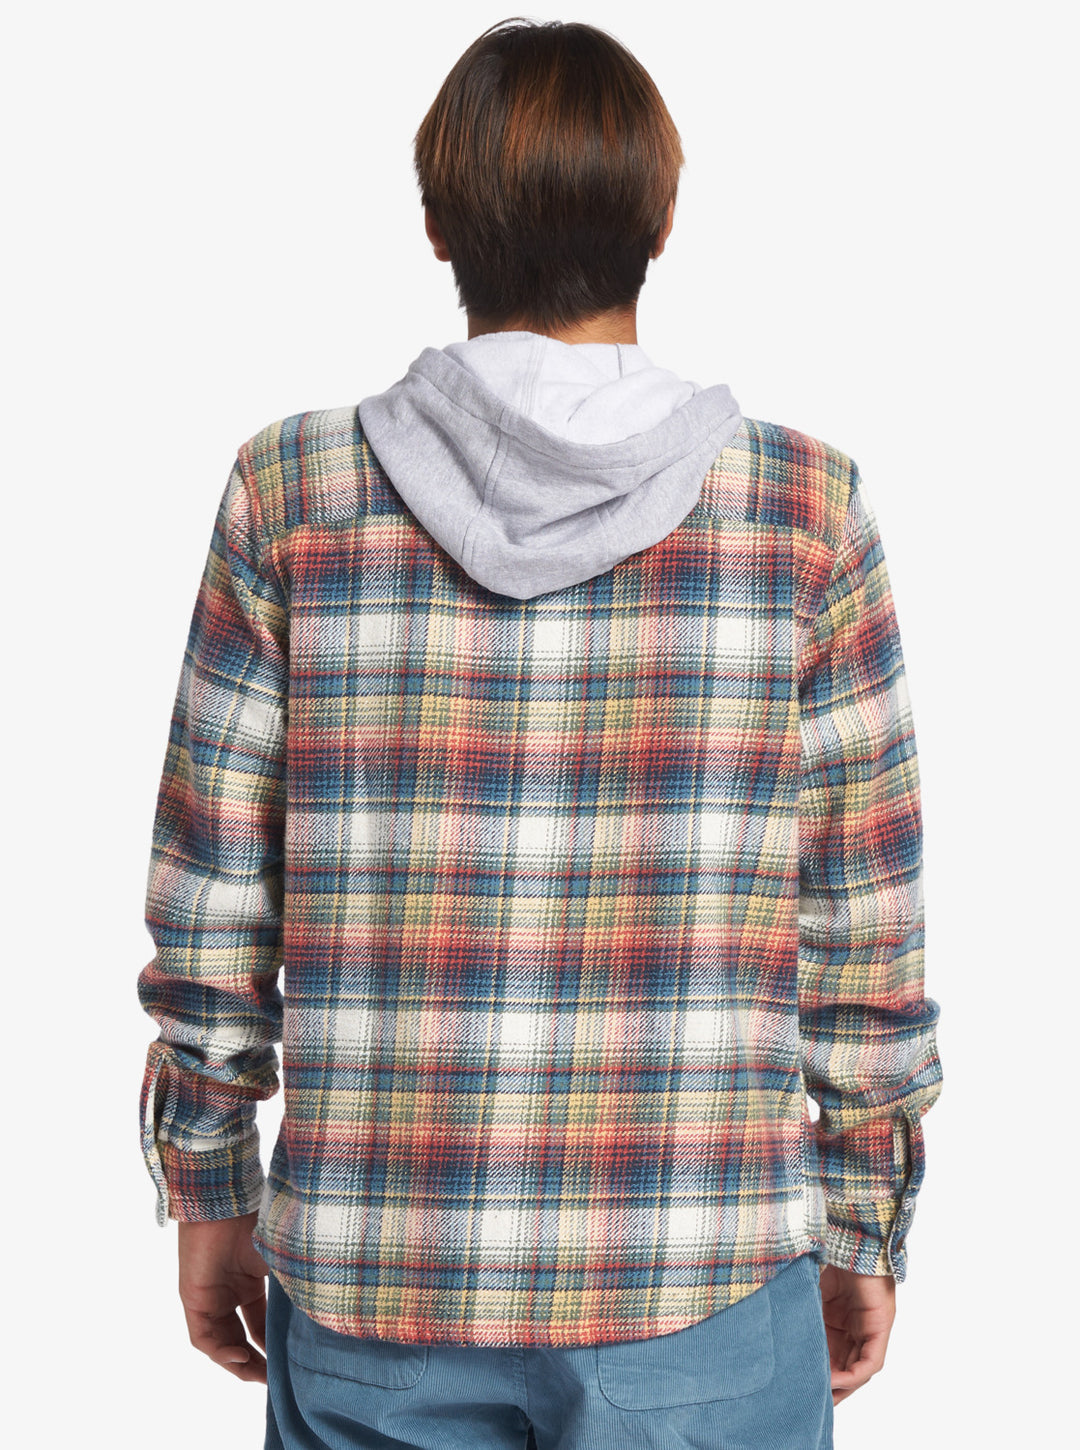 Quiksilver Briggs Hooded Flannel Long Sleeve Top - Charcoal - Sun Diego Boardshop